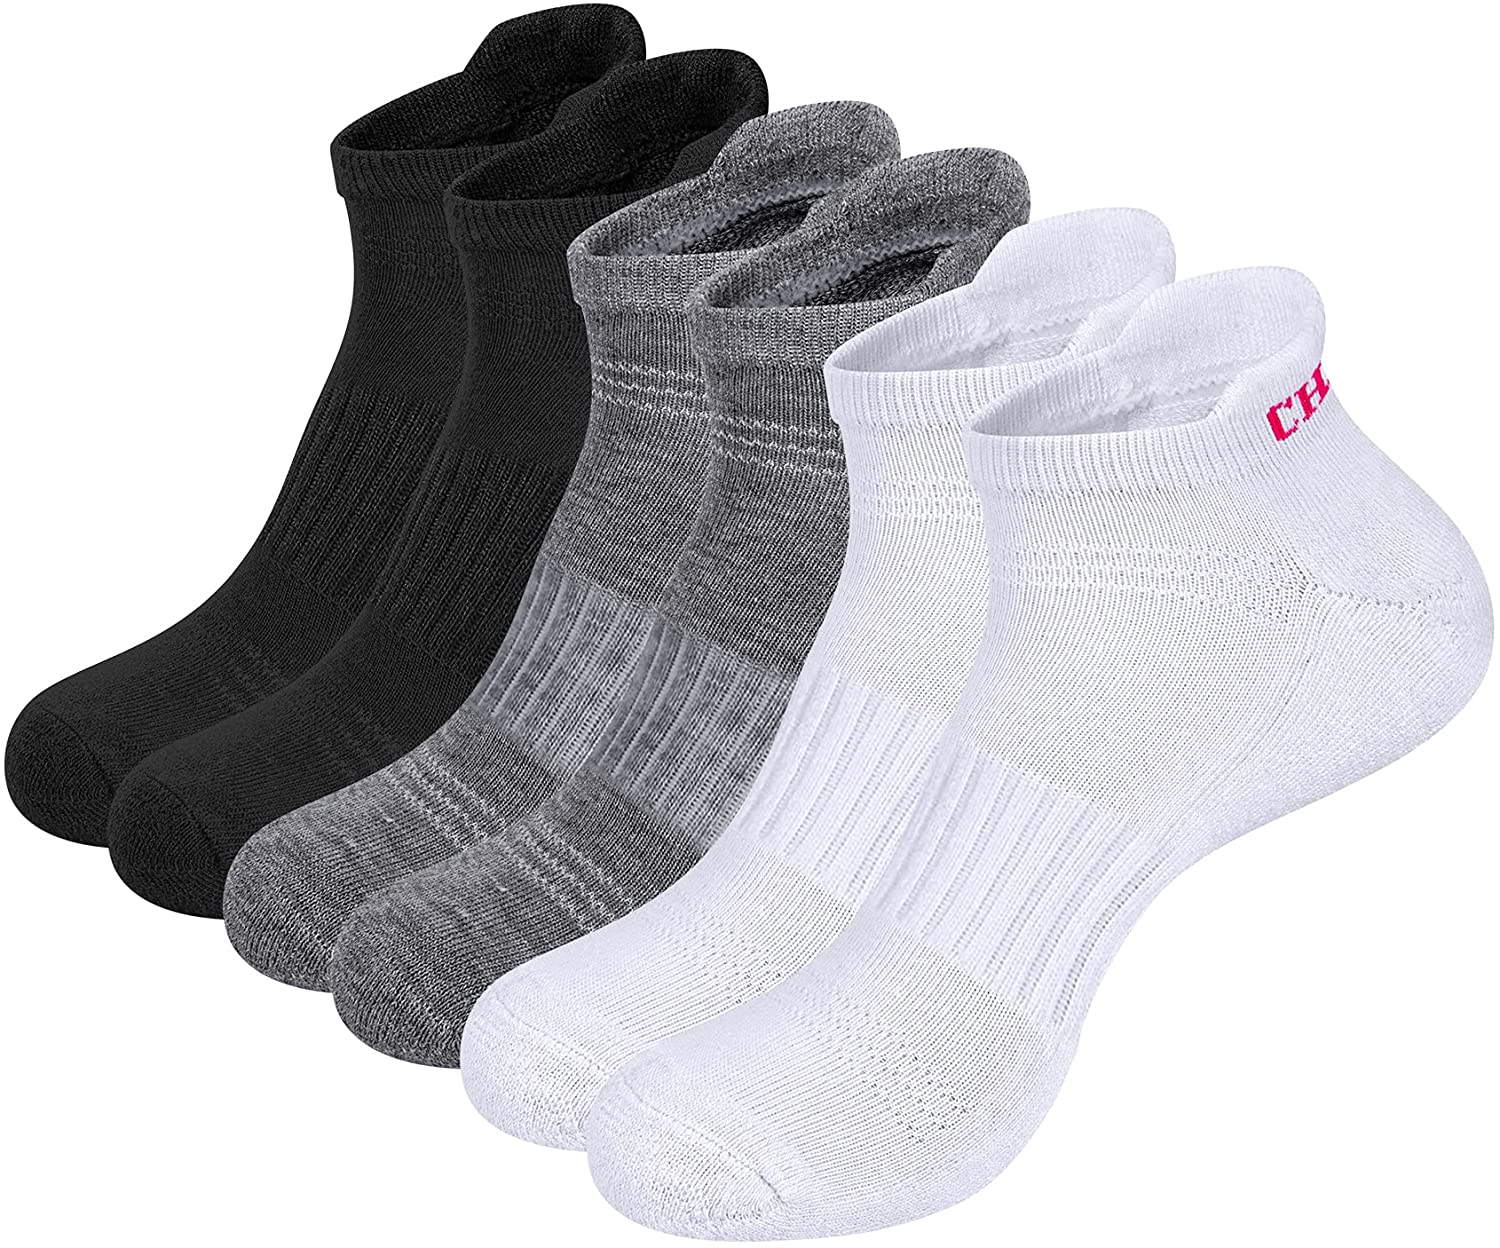 Chalier 6 Pairs Womens Ankle Socks Cushioned Low Cut Cotton Workout Sport Athletic Running Socks Gifts